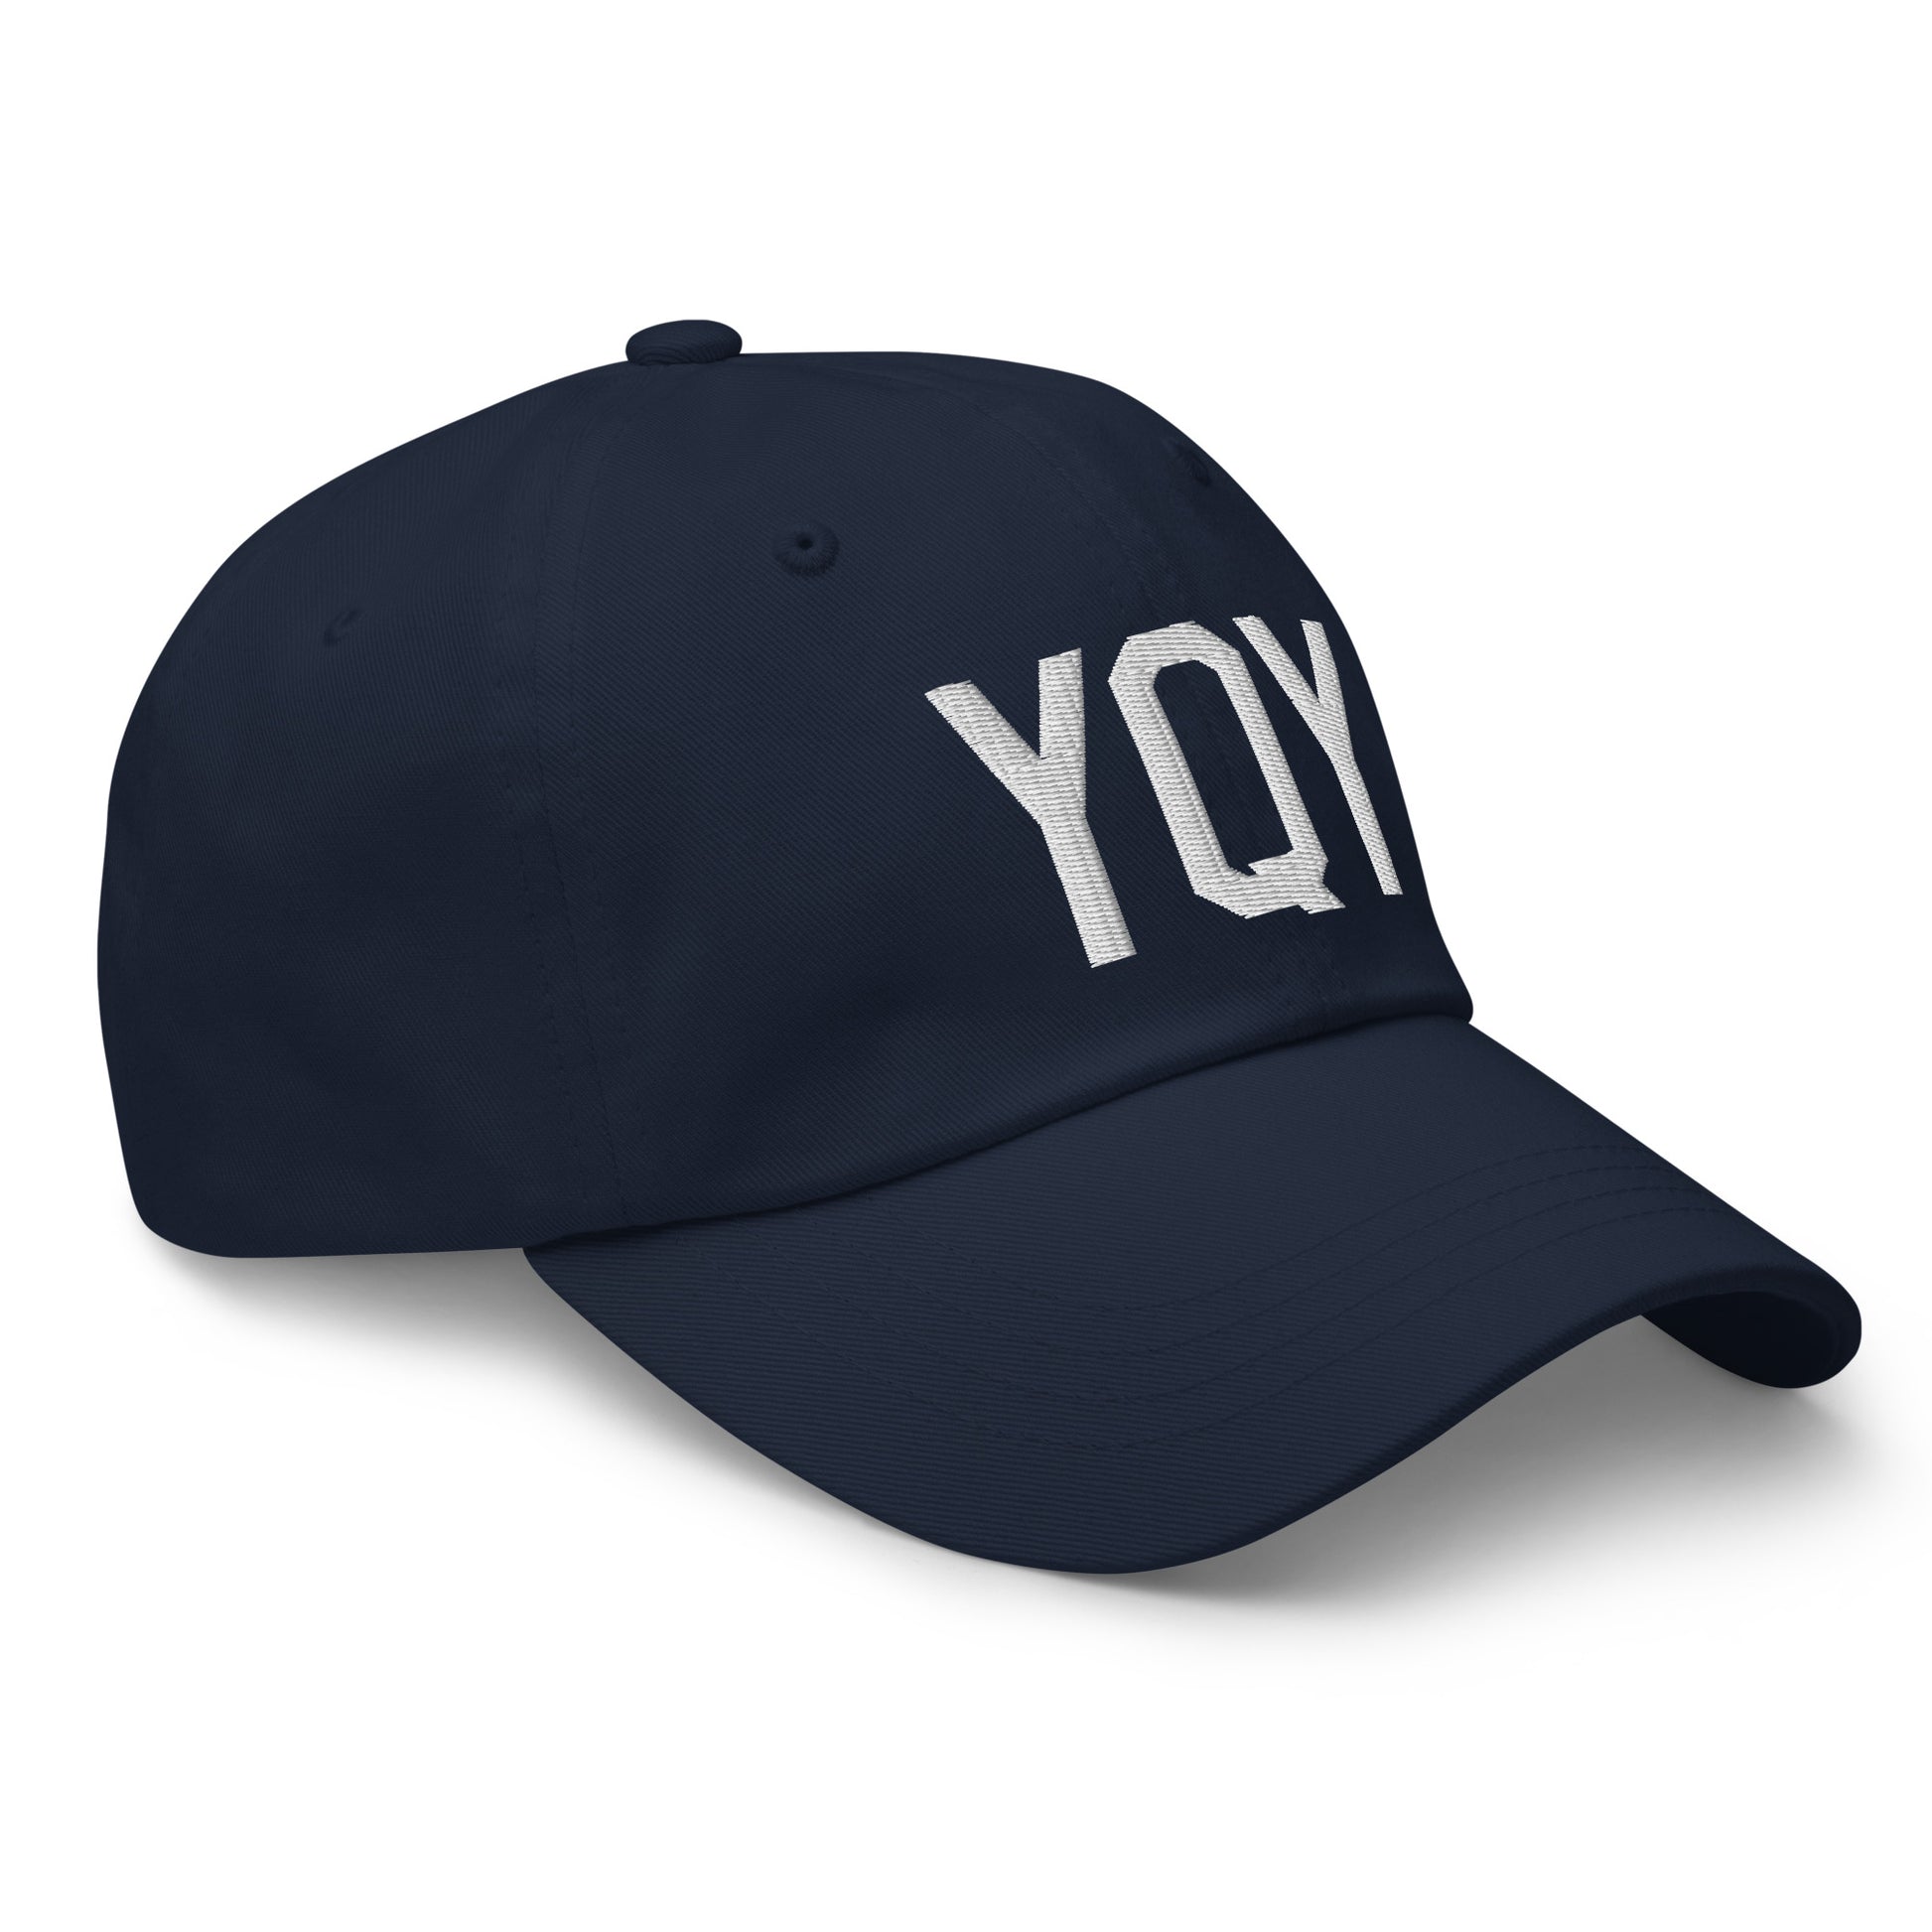 Airport Code Baseball Cap - White • YQY Sydney • YHM Designs - Image 17